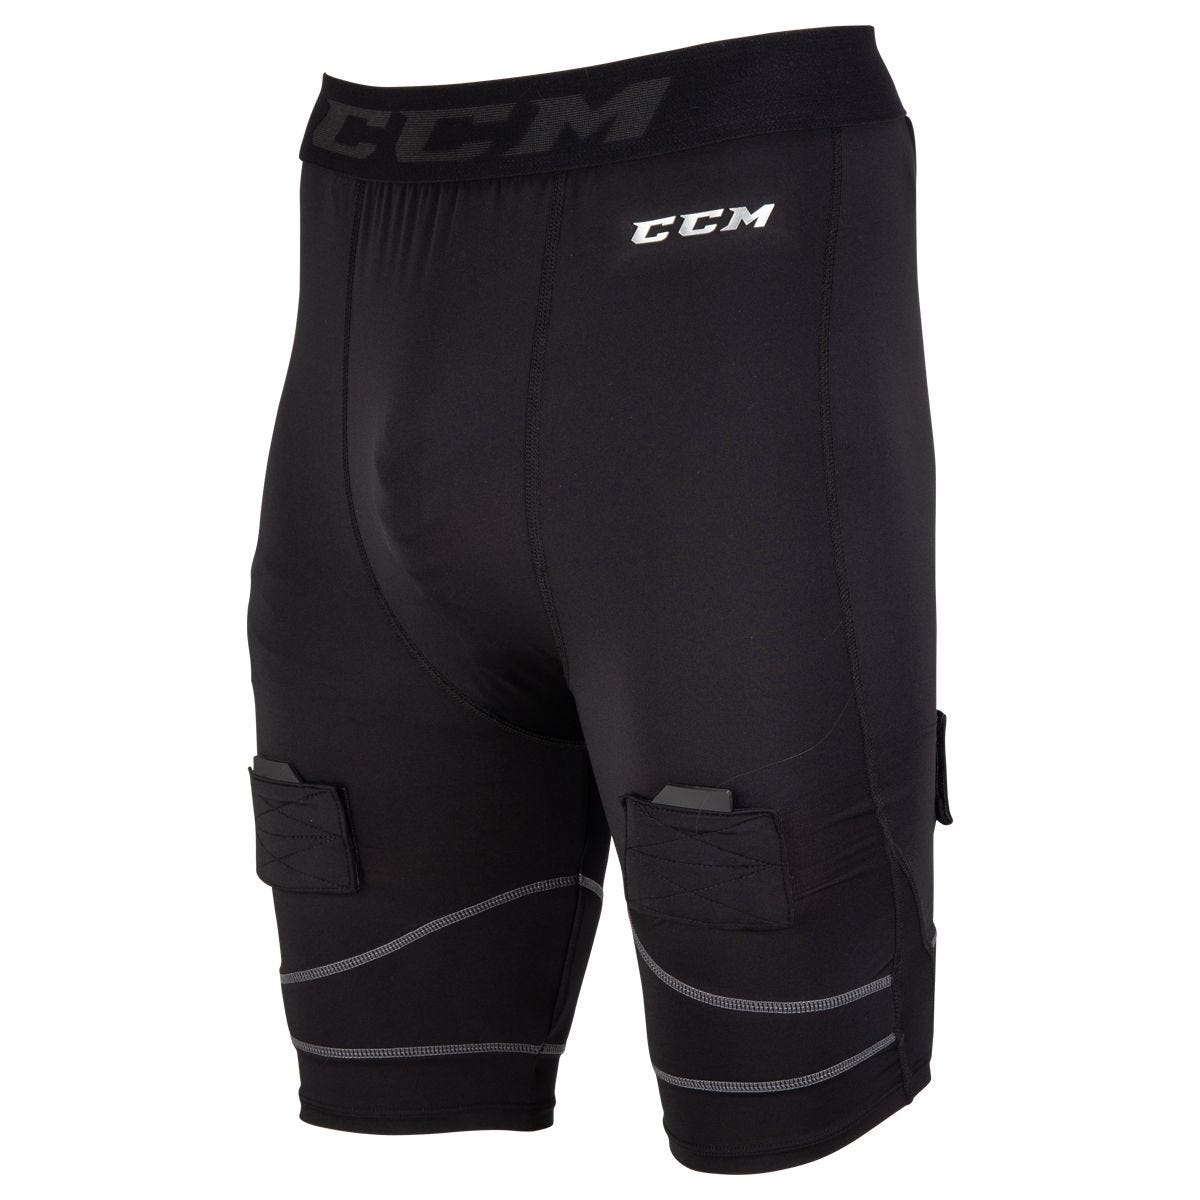 CCM Compression Pro Shorts with Jock/Tabs for Men